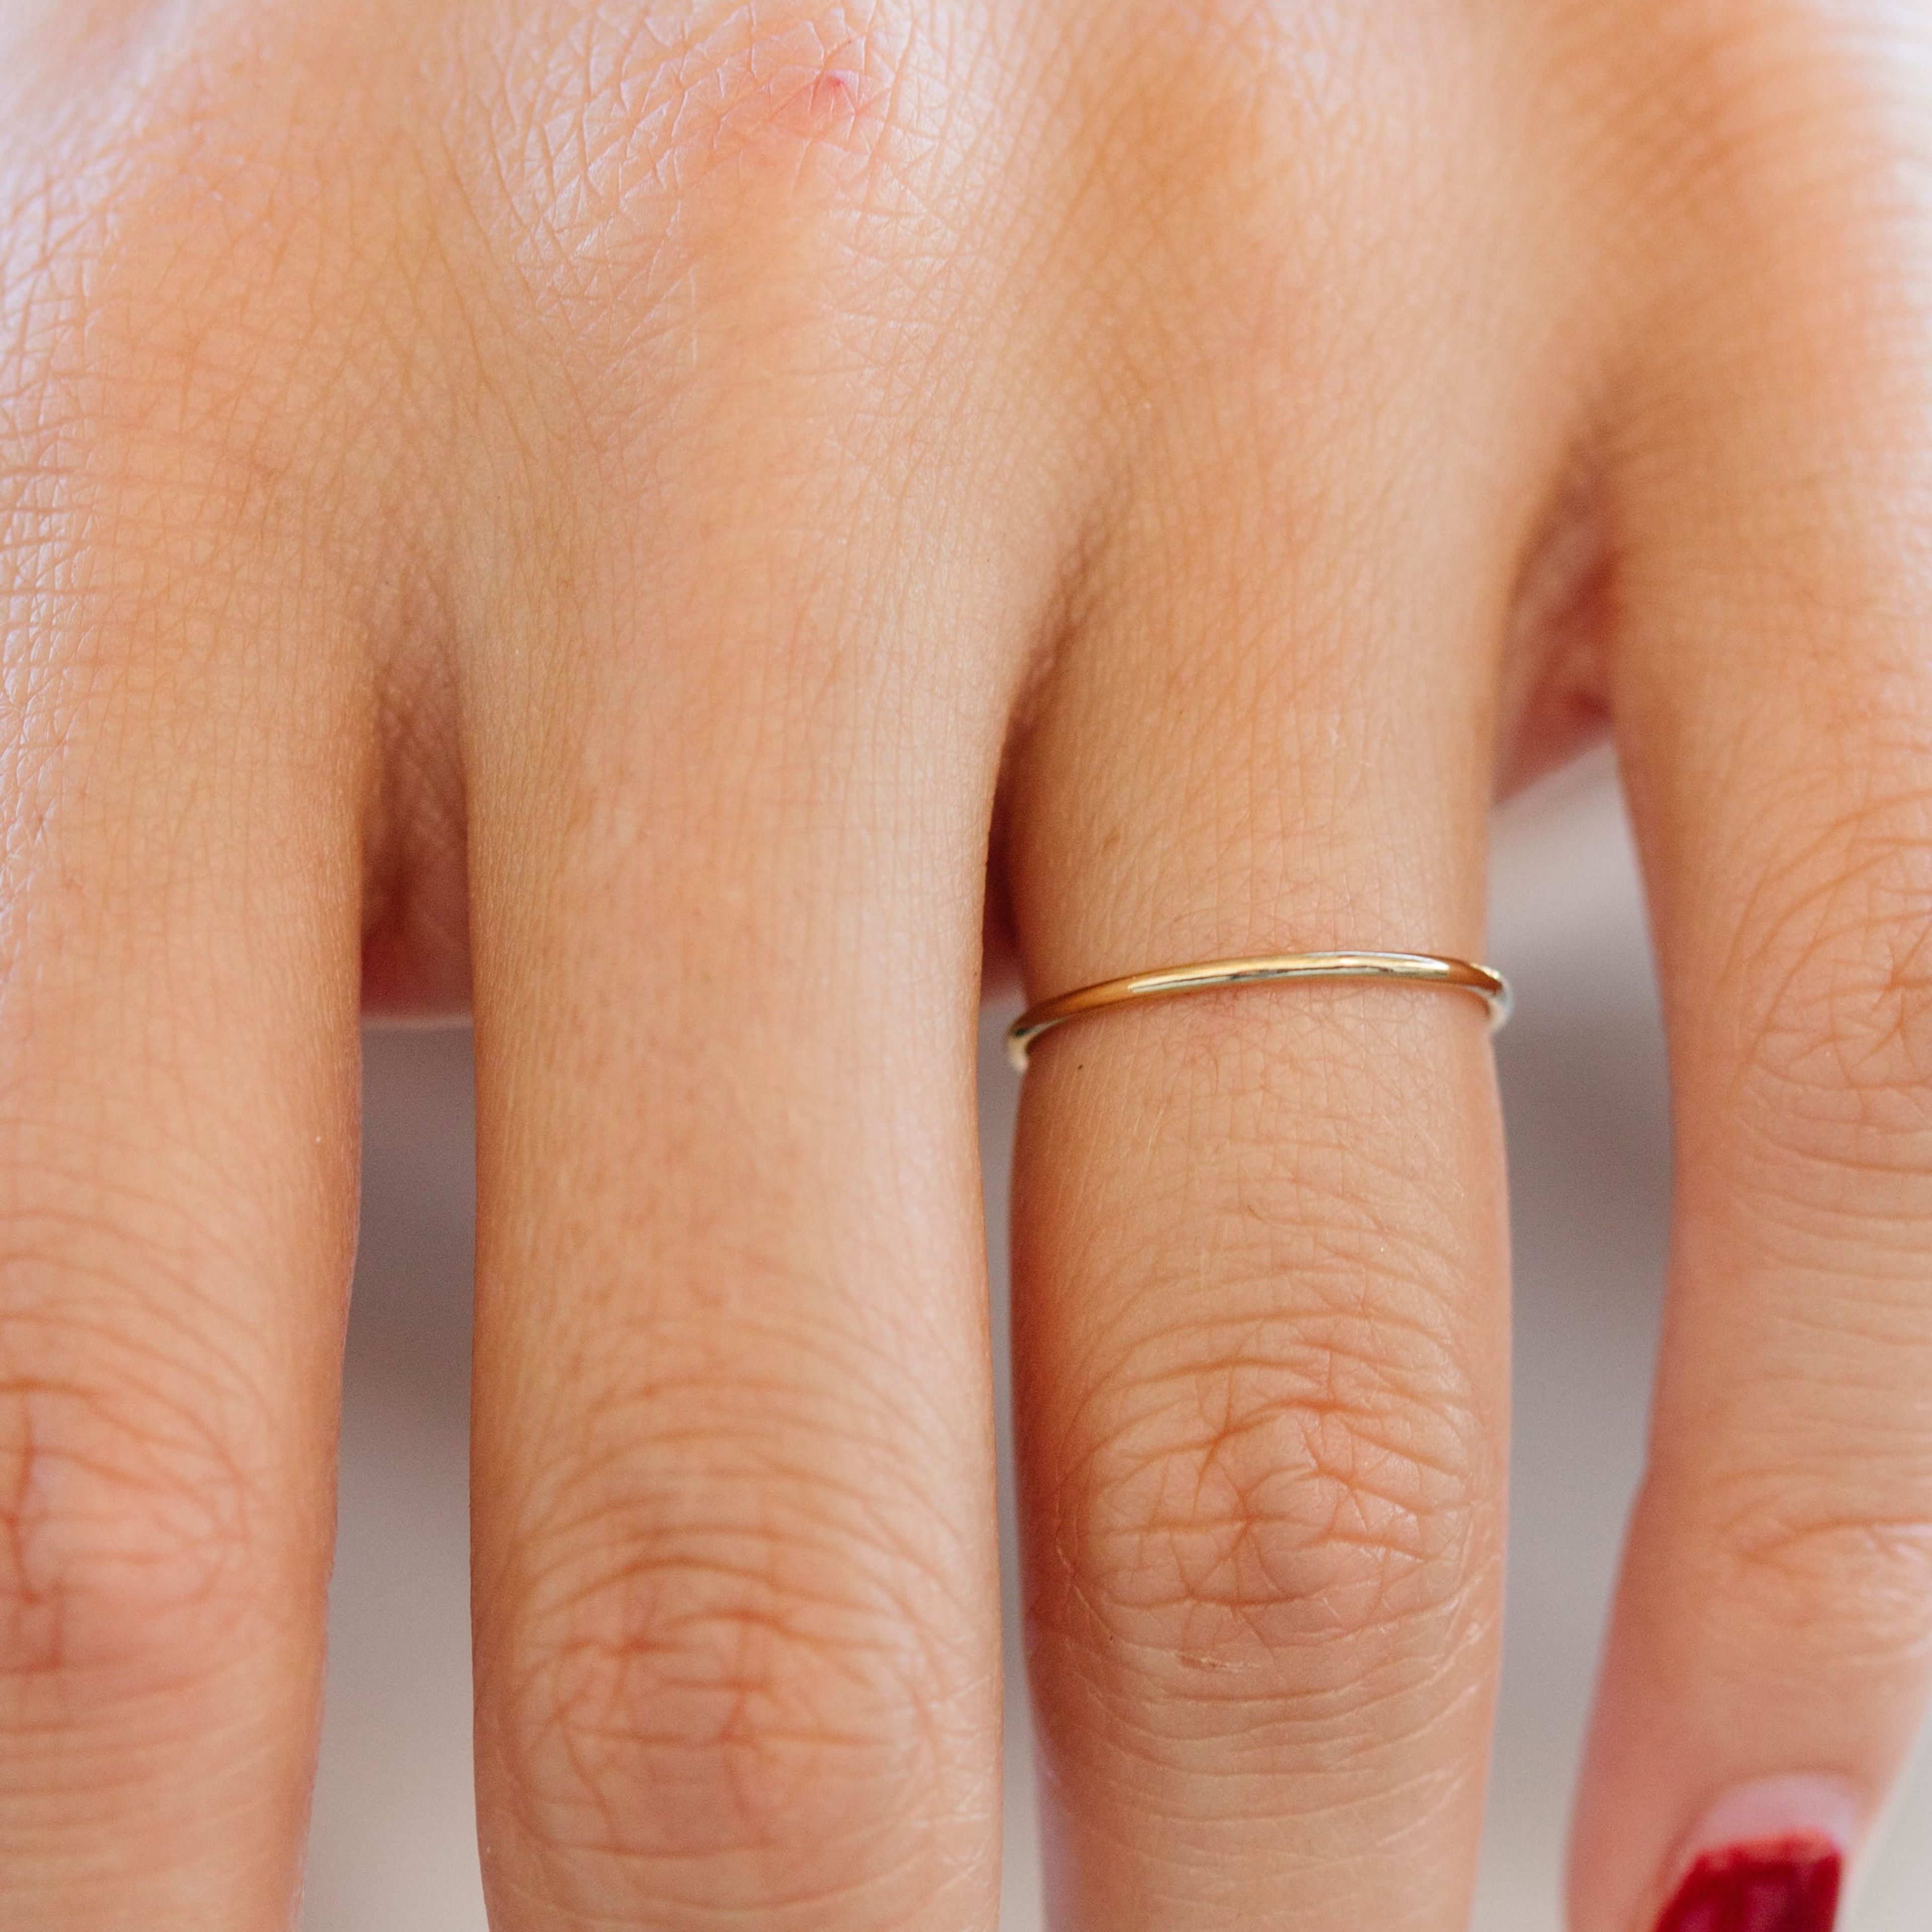 Meadow Stacking Ring